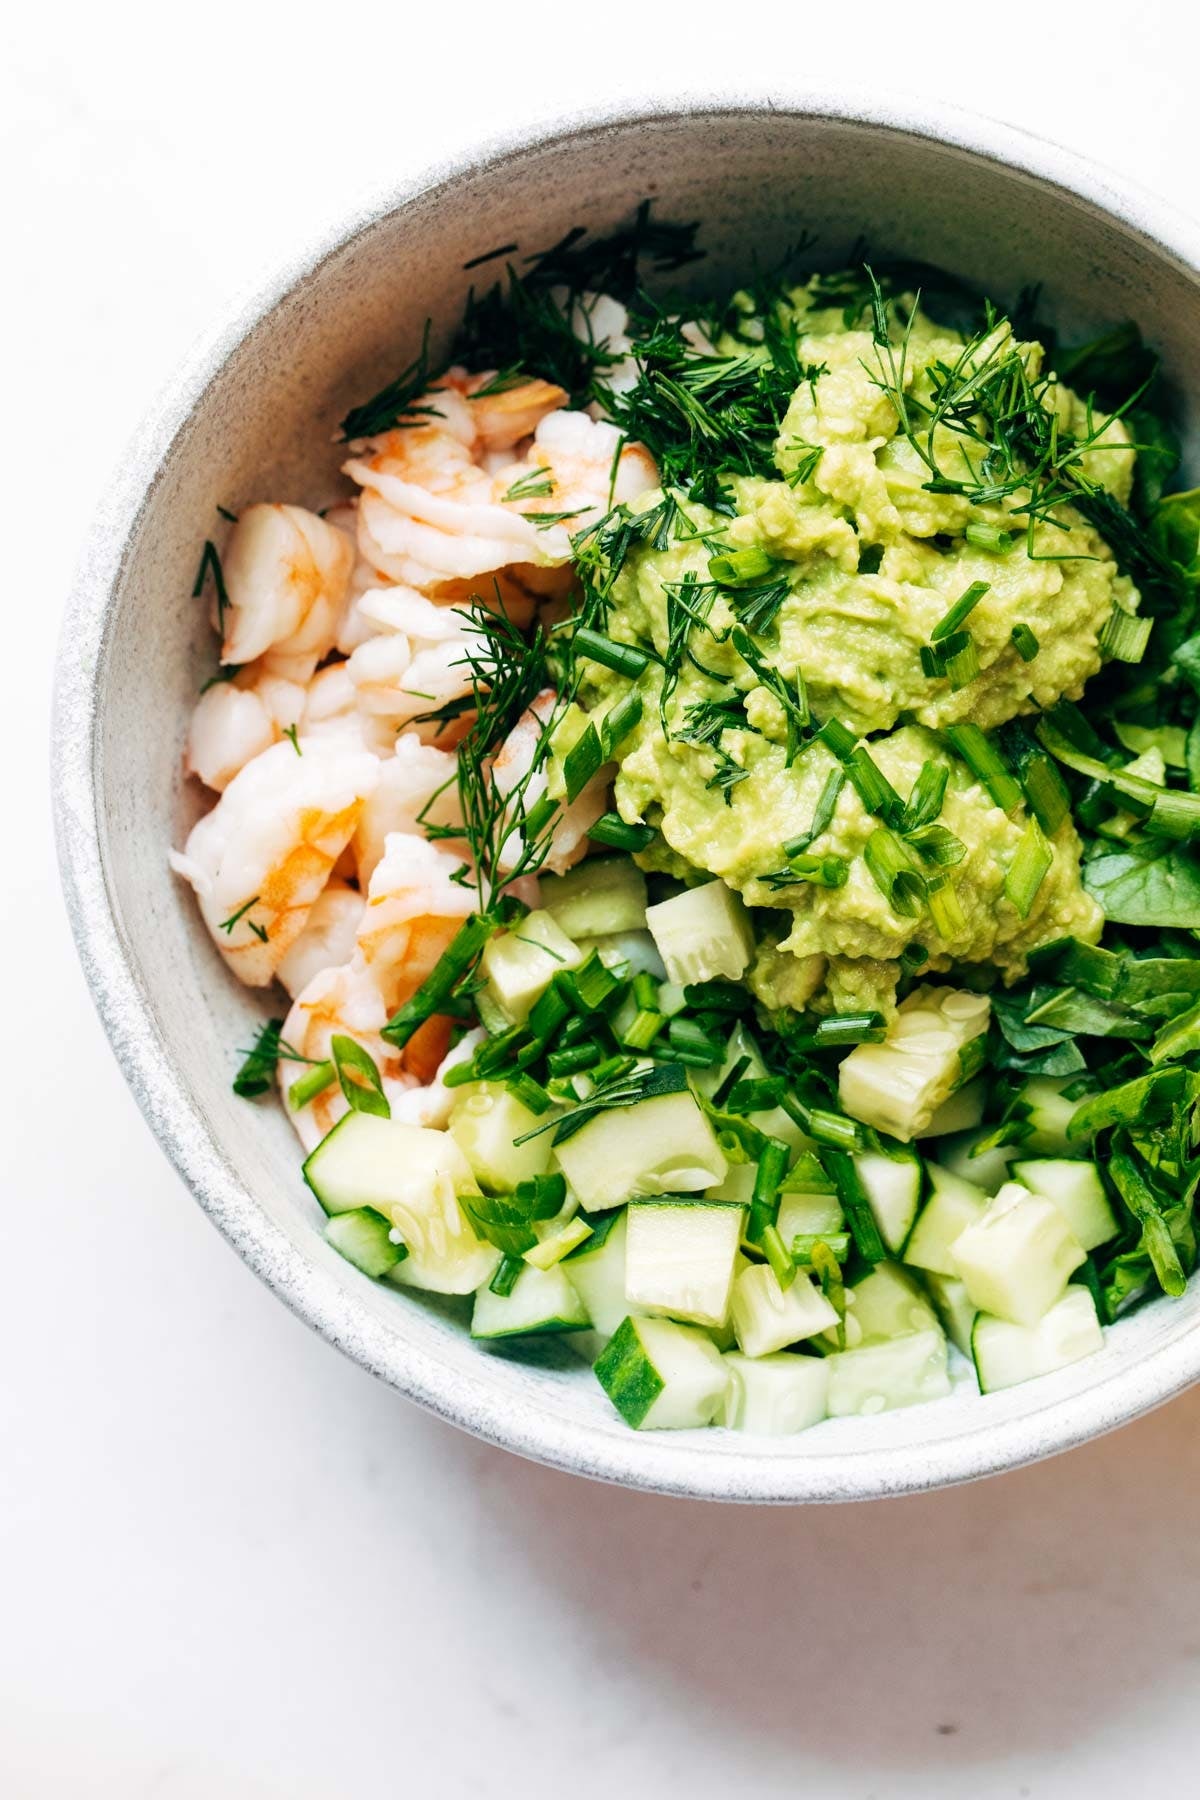 Three-minute poached shrimp, avocado, cucumber, and fresh herbs compose a salad you never knew your lunch repertoire needed. (via <strong><a href="https://pinchofyum.com/super-quick-avocado-shrimp-salad">Pinch of Yum</a></strong>)